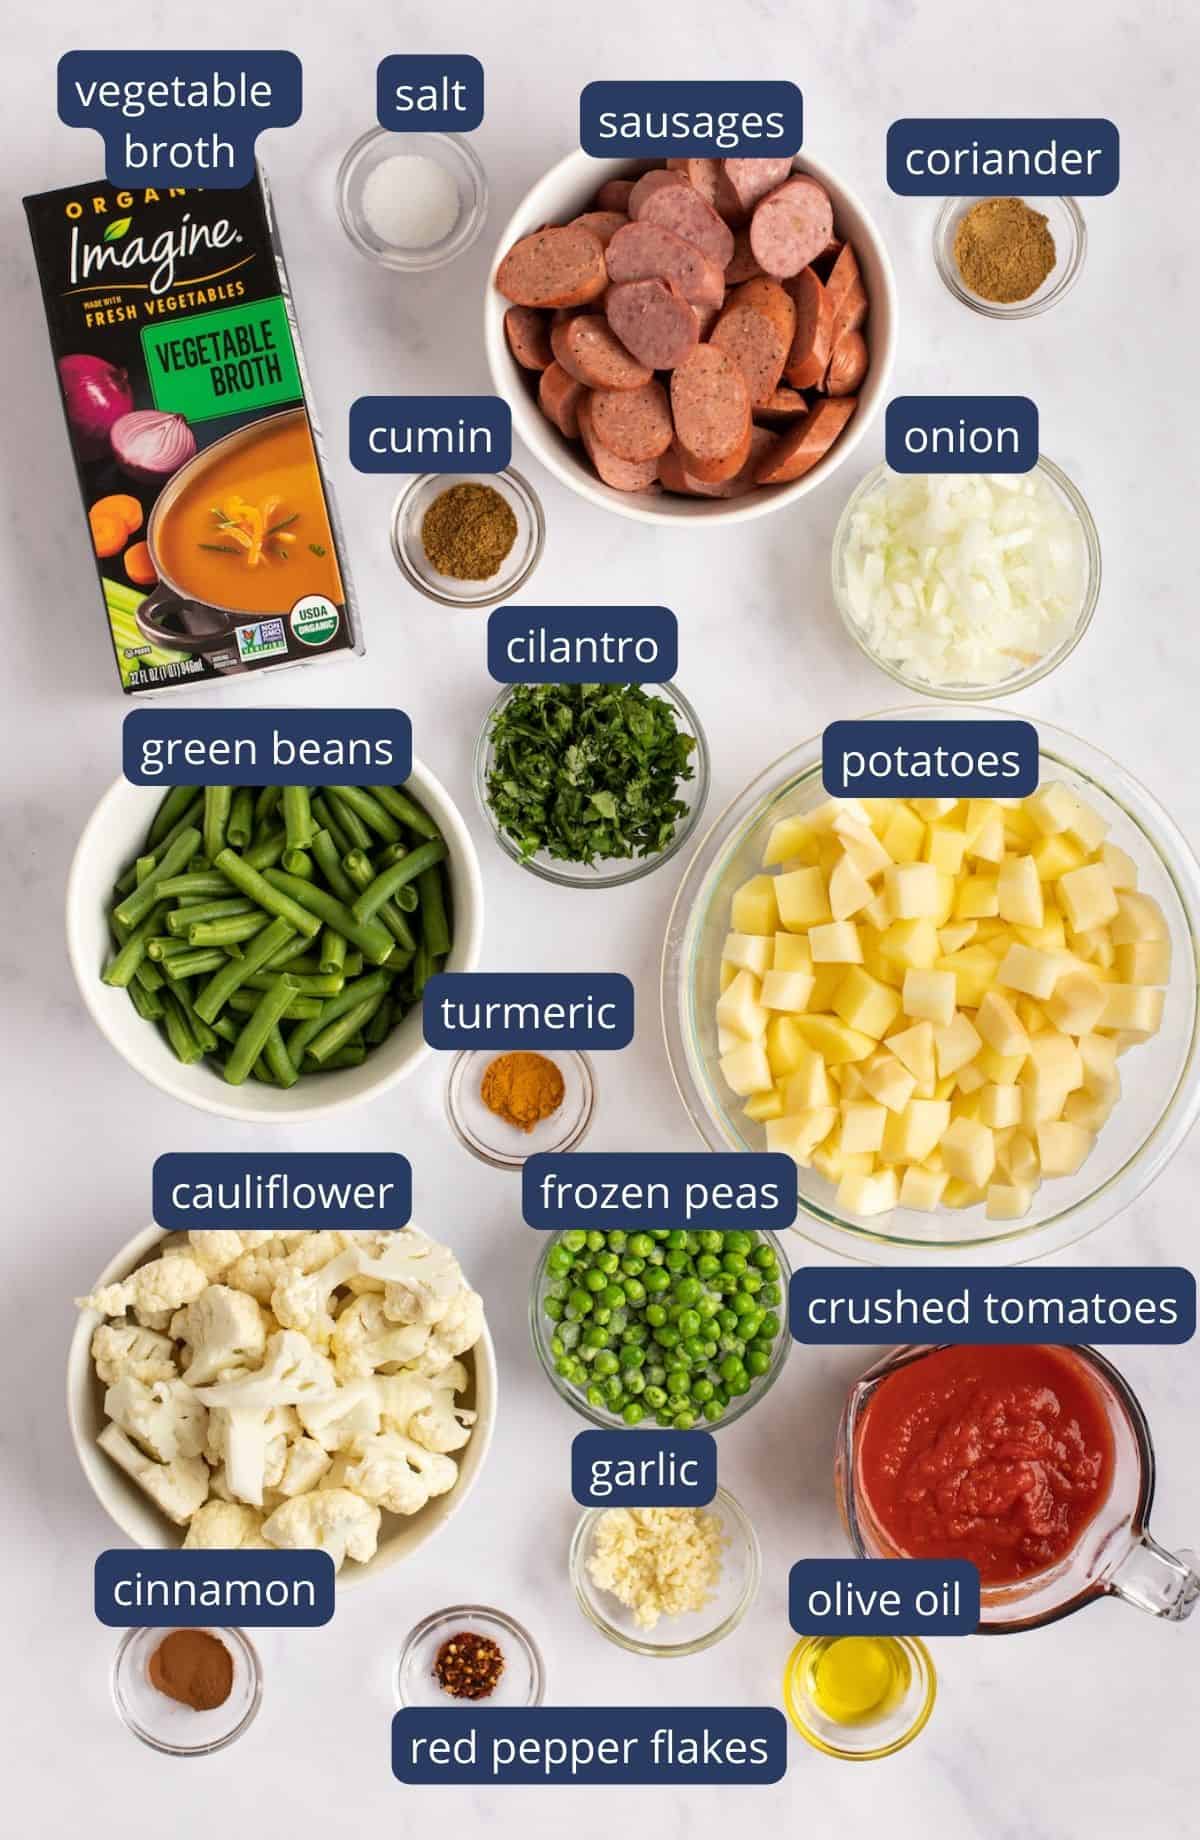 Ingredients for sausage curry with text overlay